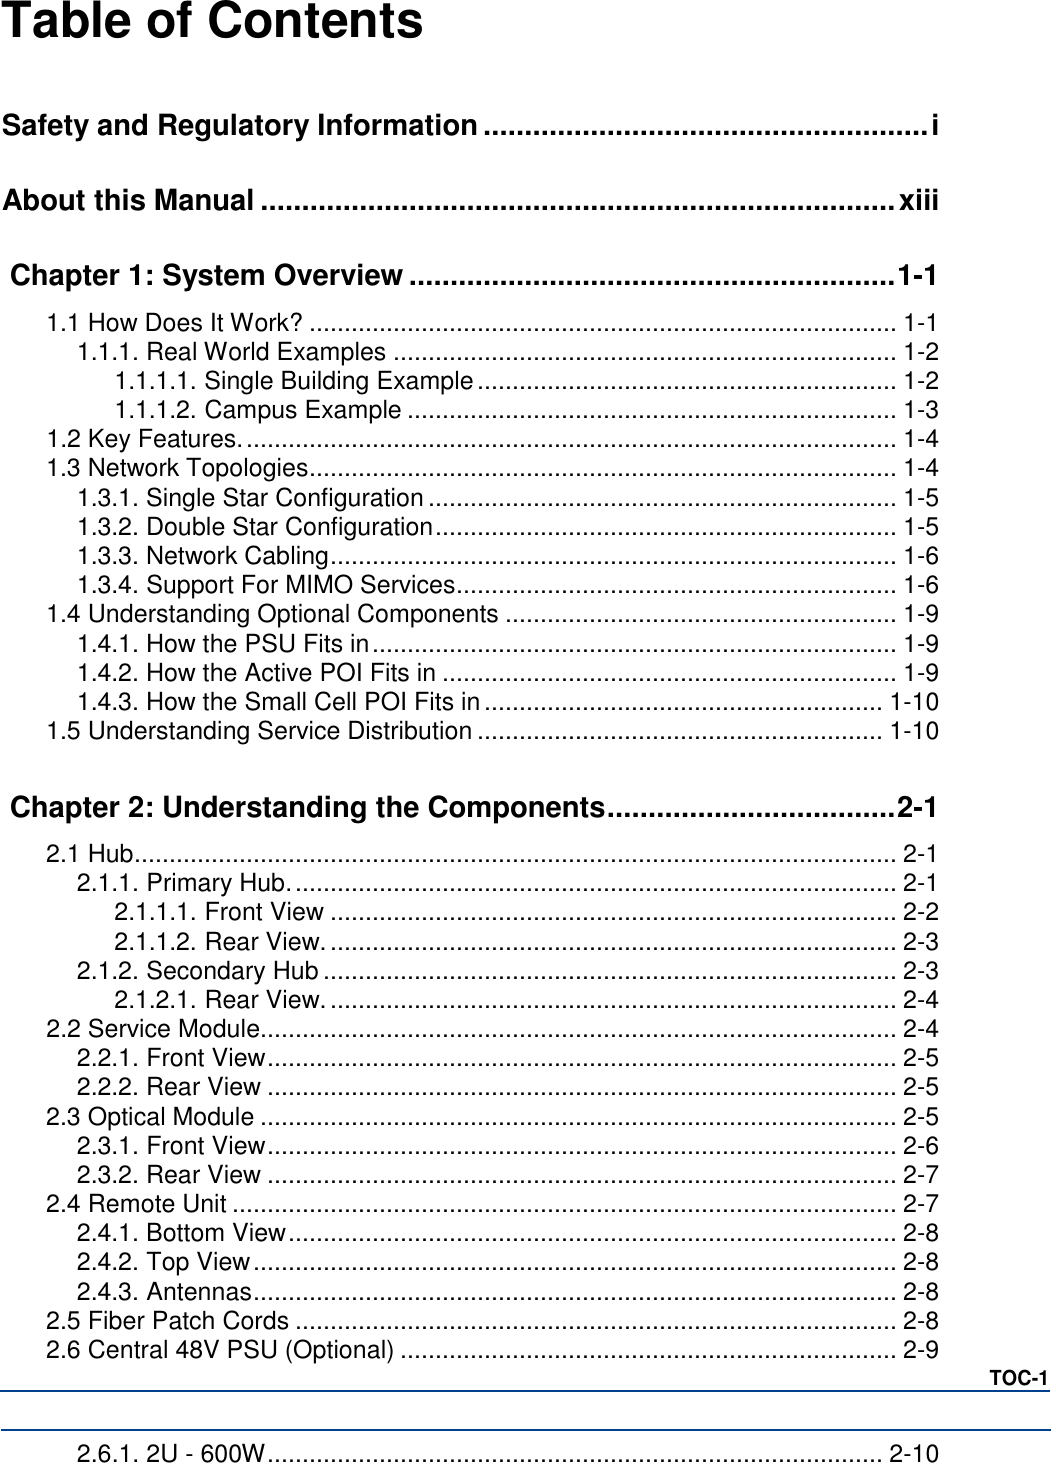 Table of Contents   Safety and Regulatory Information ...................................................... i About this Manual ............................................................................. xiii Chapter 1: System Overview ........................................................... 1-1 1.1 How Does It Work? .................................................................................... 1-1 1.1.1. Real World Examples ........................................................................ 1-2 1.1.1.1. Single Building Example ............................................................ 1-2 1.1.1.2. Campus Example ...................................................................... 1-3 1.2 Key Features. ............................................................................................. 1-4 1.3 Network Topologies .................................................................................... 1-4 1.3.1. Single Star Configuration ................................................................... 1-5 1.3.2. Double Star Configuration .................................................................. 1-5 1.3.3. Network Cabling ................................................................................. 1-6 1.3.4. Support For MIMO Services ............................................................... 1-6 1.4 Understanding Optional Components ........................................................ 1-9 1.4.1. How the PSU Fits in ........................................................................... 1-9 1.4.2. How the Active POI Fits in ................................................................. 1-9 1.4.3. How the Small Cell POI Fits in ......................................................... 1-10 1.5 Understanding Service Distribution .......................................................... 1-10 Chapter 2: Understanding the Components ................................... 2-1 2.1 Hub ............................................................................................................. 2-1 2.1.1. Primary Hub. ...................................................................................... 2-1 2.1.1.1. Front View ................................................................................. 2-2 2.1.1.2. Rear View. ................................................................................. 2-3 2.1.2. Secondary Hub .................................................................................. 2-3 2.1.2.1. Rear View. ................................................................................. 2-4 2.2 Service Module........................................................................................... 2-4 2.2.1. Front View .......................................................................................... 2-5 2.2.2. Rear View .......................................................................................... 2-5 2.3 Optical Module ........................................................................................... 2-5 2.3.1. Front View .......................................................................................... 2-6 2.3.2. Rear View .......................................................................................... 2-7 2.4 Remote Unit ............................................................................................... 2-7 2.4.1. Bottom View ....................................................................................... 2-8 2.4.2. Top View ............................................................................................ 2-8 2.4.3. Antennas ............................................................................................ 2-8 2.5 Fiber Patch Cords ...................................................................................... 2-8 2.6 Central 48V PSU (Optional) ....................................................................... 2-9 TOC-1 2.6.1. 2U - 600W ........................................................................................ 2-10 